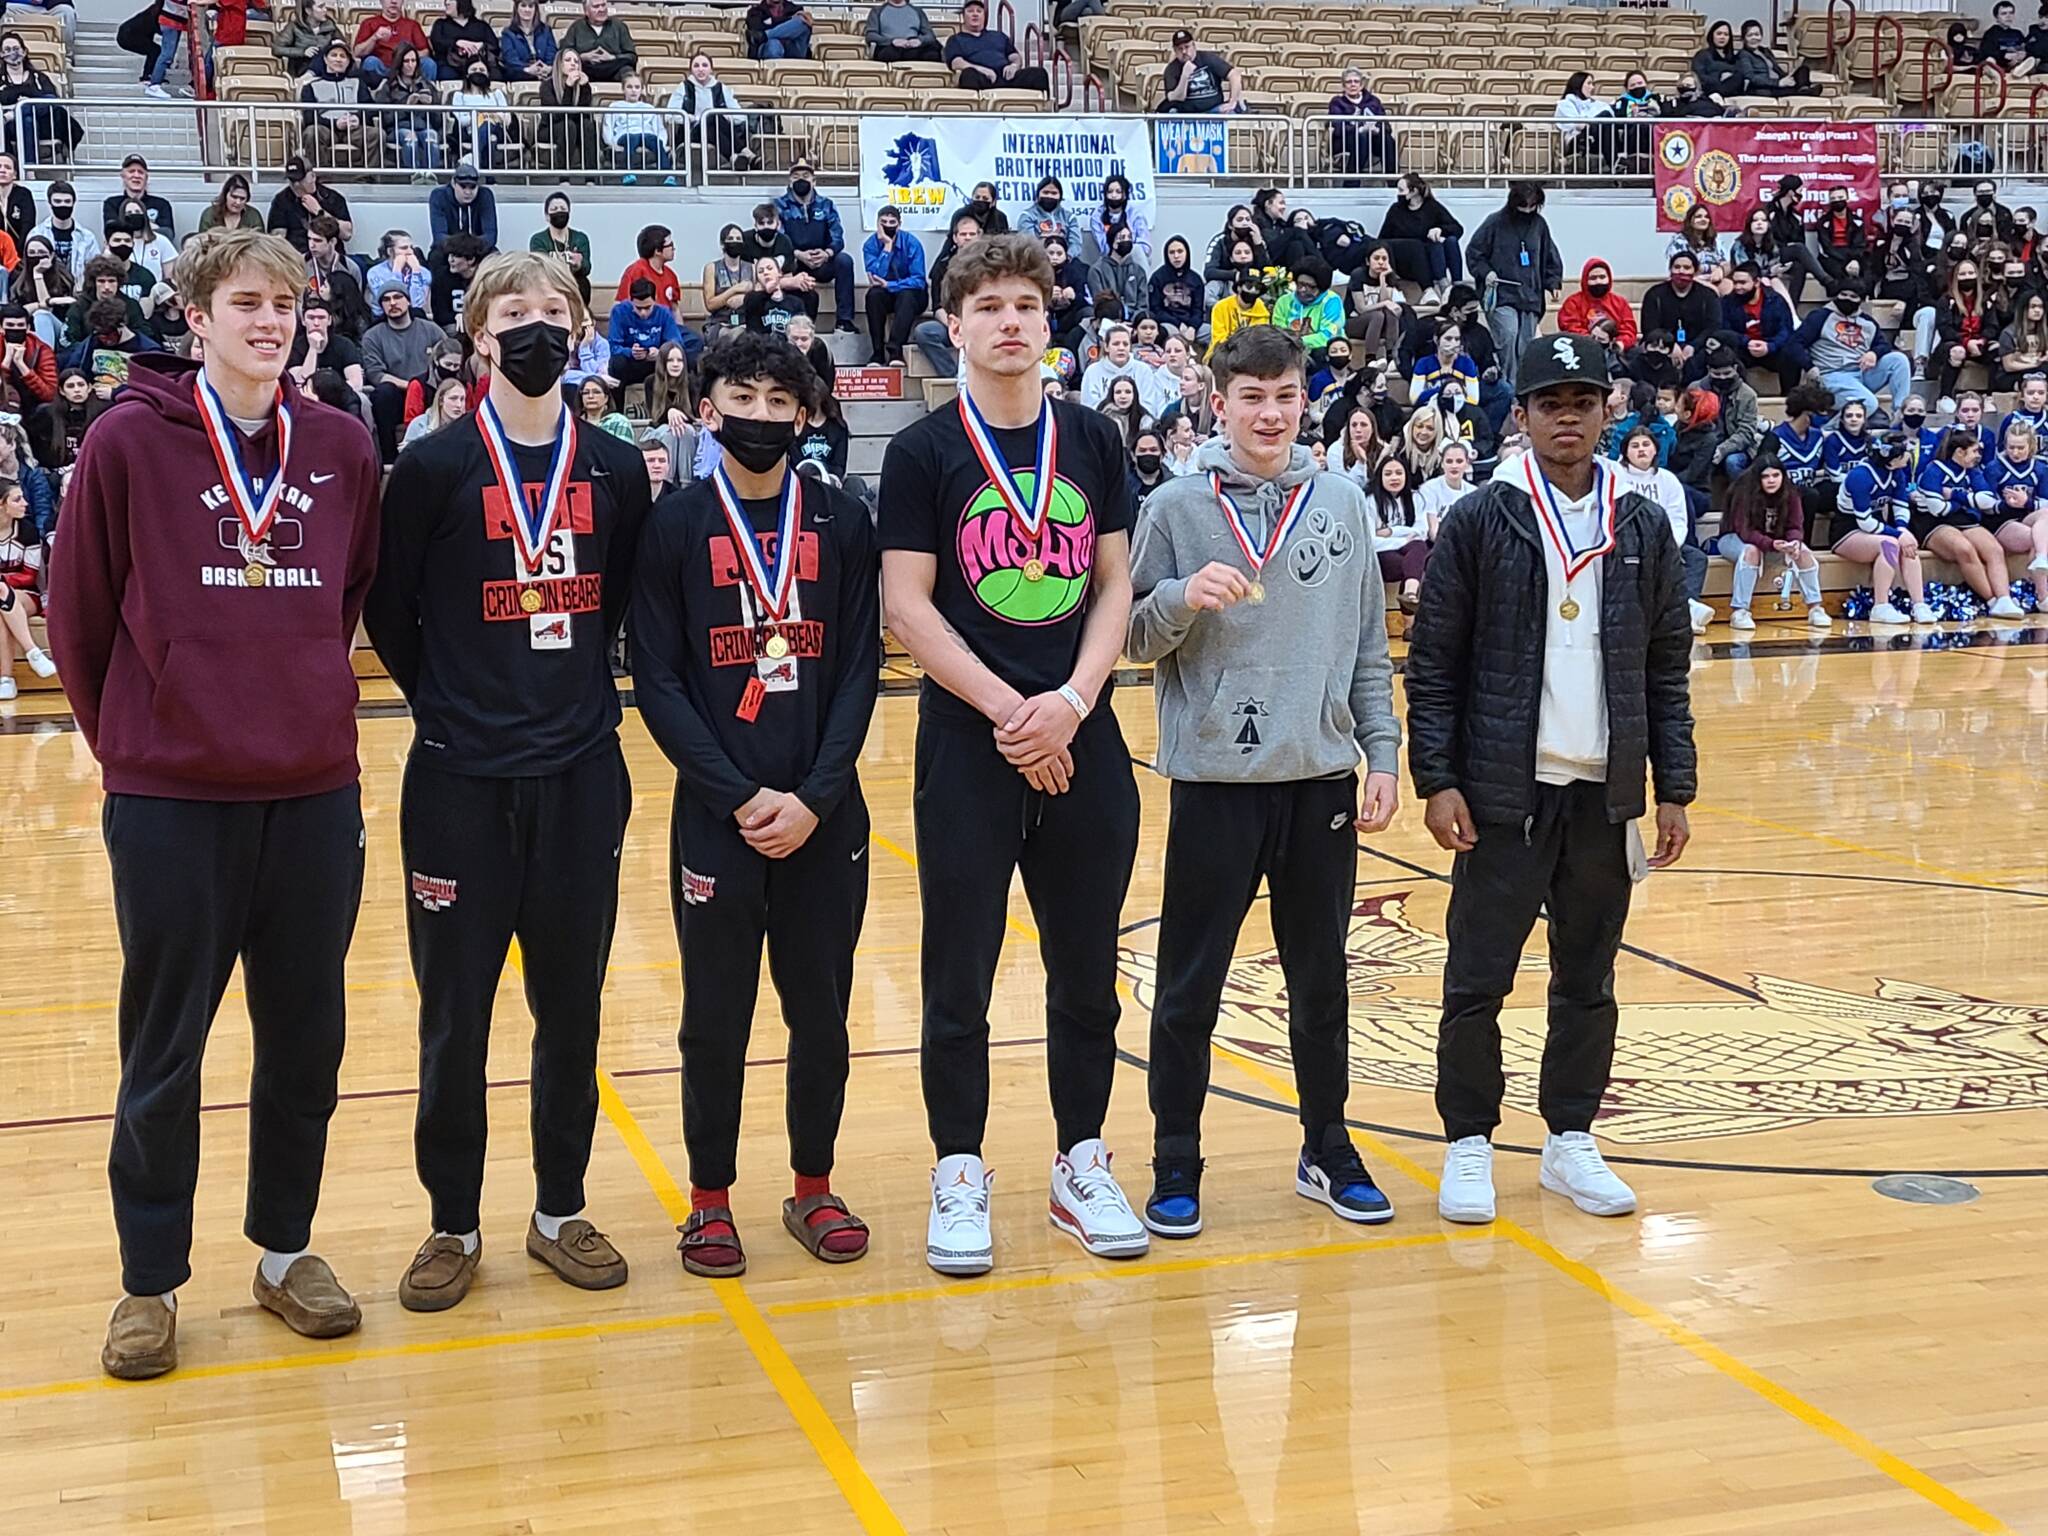 Athletes who received Region V 4A All-Conference honors pose for a photo following the Region V Tournament. Those receiving all-conference honors were Josh Rhoads of KHS, Sean Oliver of JDHS, Alwen Carrillo of JDHS, Thomas Baxter of TMHS, Sam Lockhart of TMHS and J.J. Parker of KHS. (Courtesy Photo)